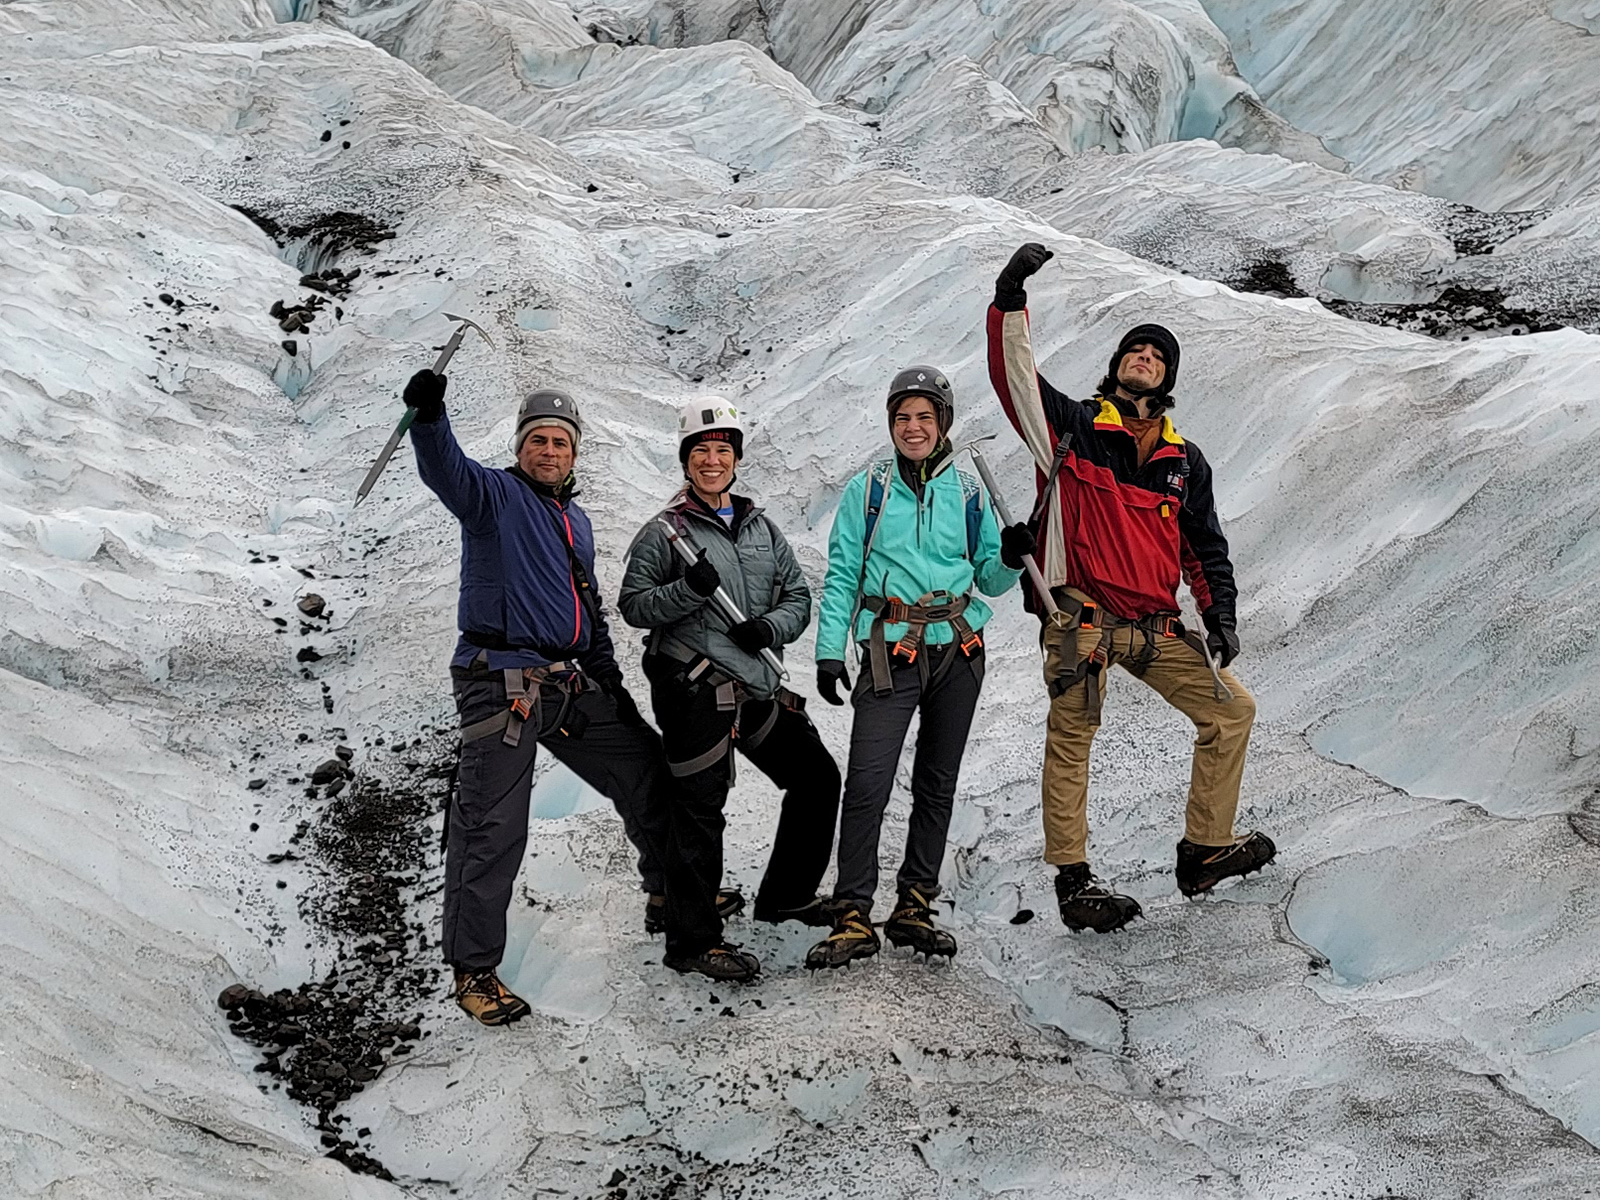 Tom Barbieri, from left, Shana Silverstein, and their children, Talia and Liam, pose on a glacier while vacationing in Iceland in July 2022. Photo courtesy Shana Silverstein